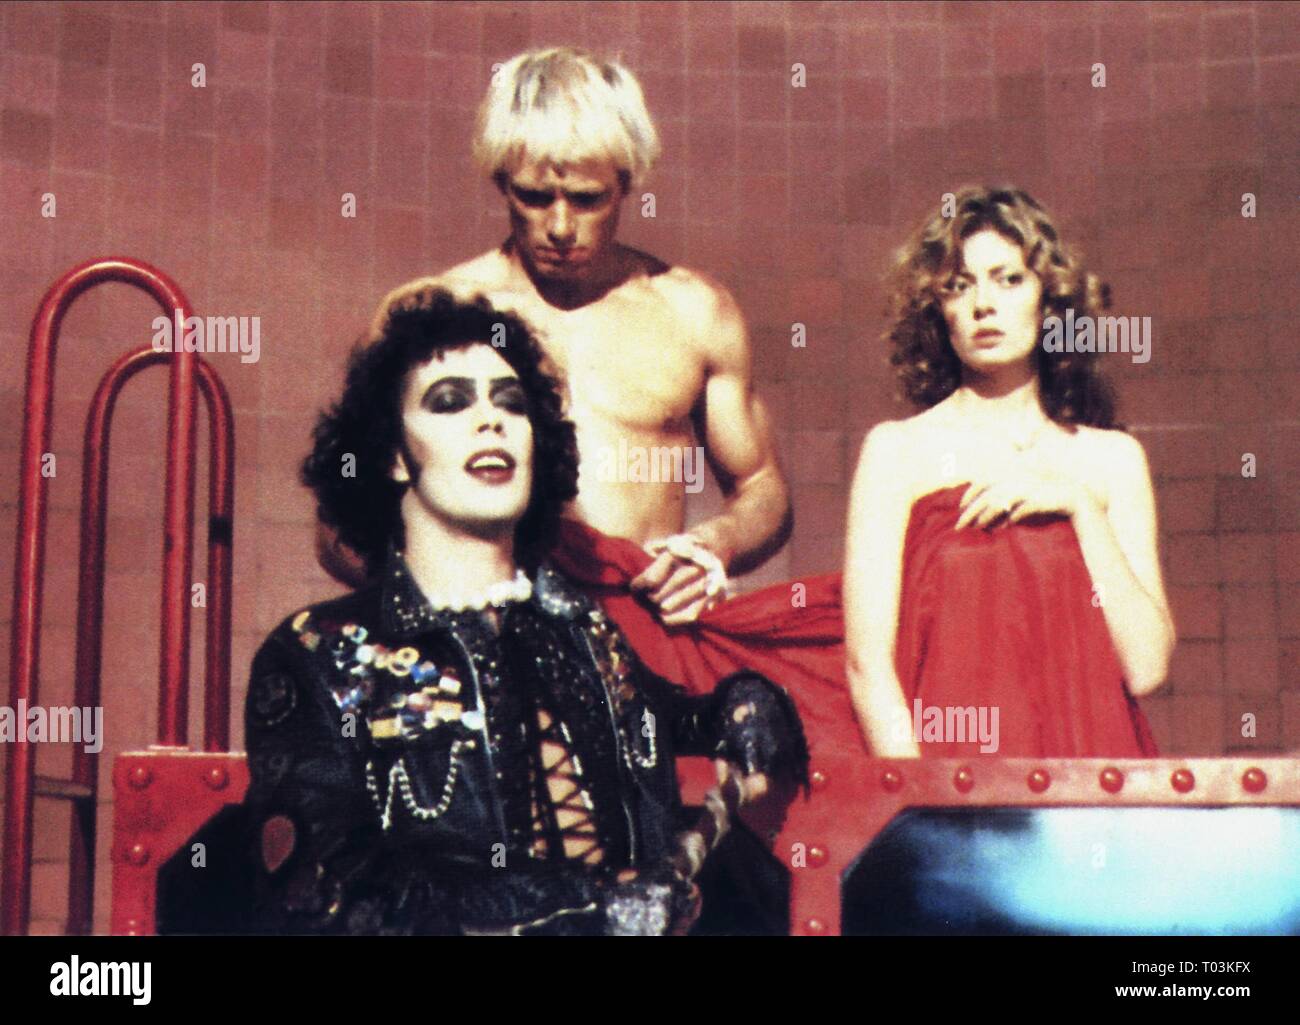 TIM CURRY, PETER HINWOOD, Susan Sarandon, The Rocky Horror Picture Show, 1975 Foto Stock